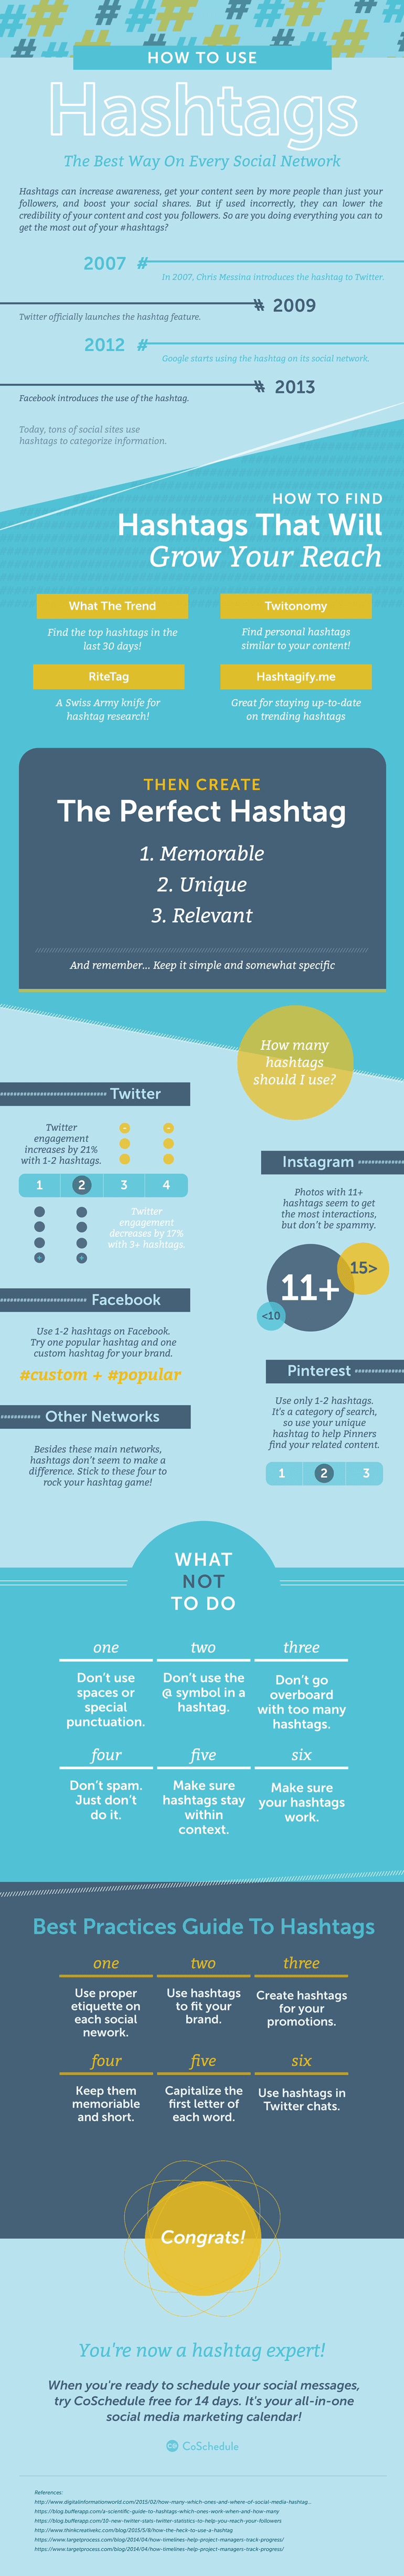 How to Use Hashtags infographic